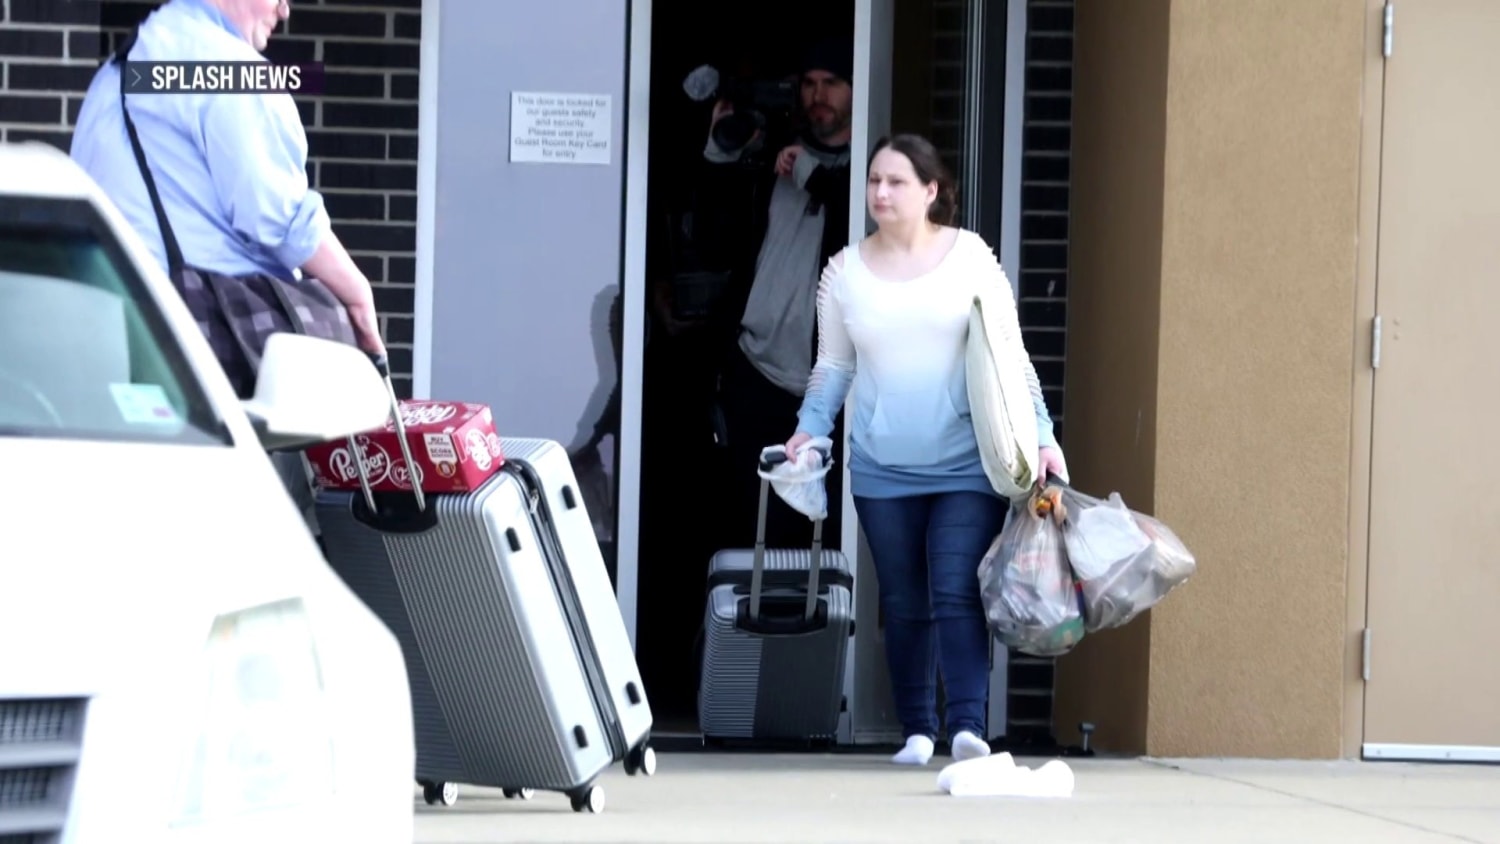 Gypsy Rose Blanchard released from prison early after serving time